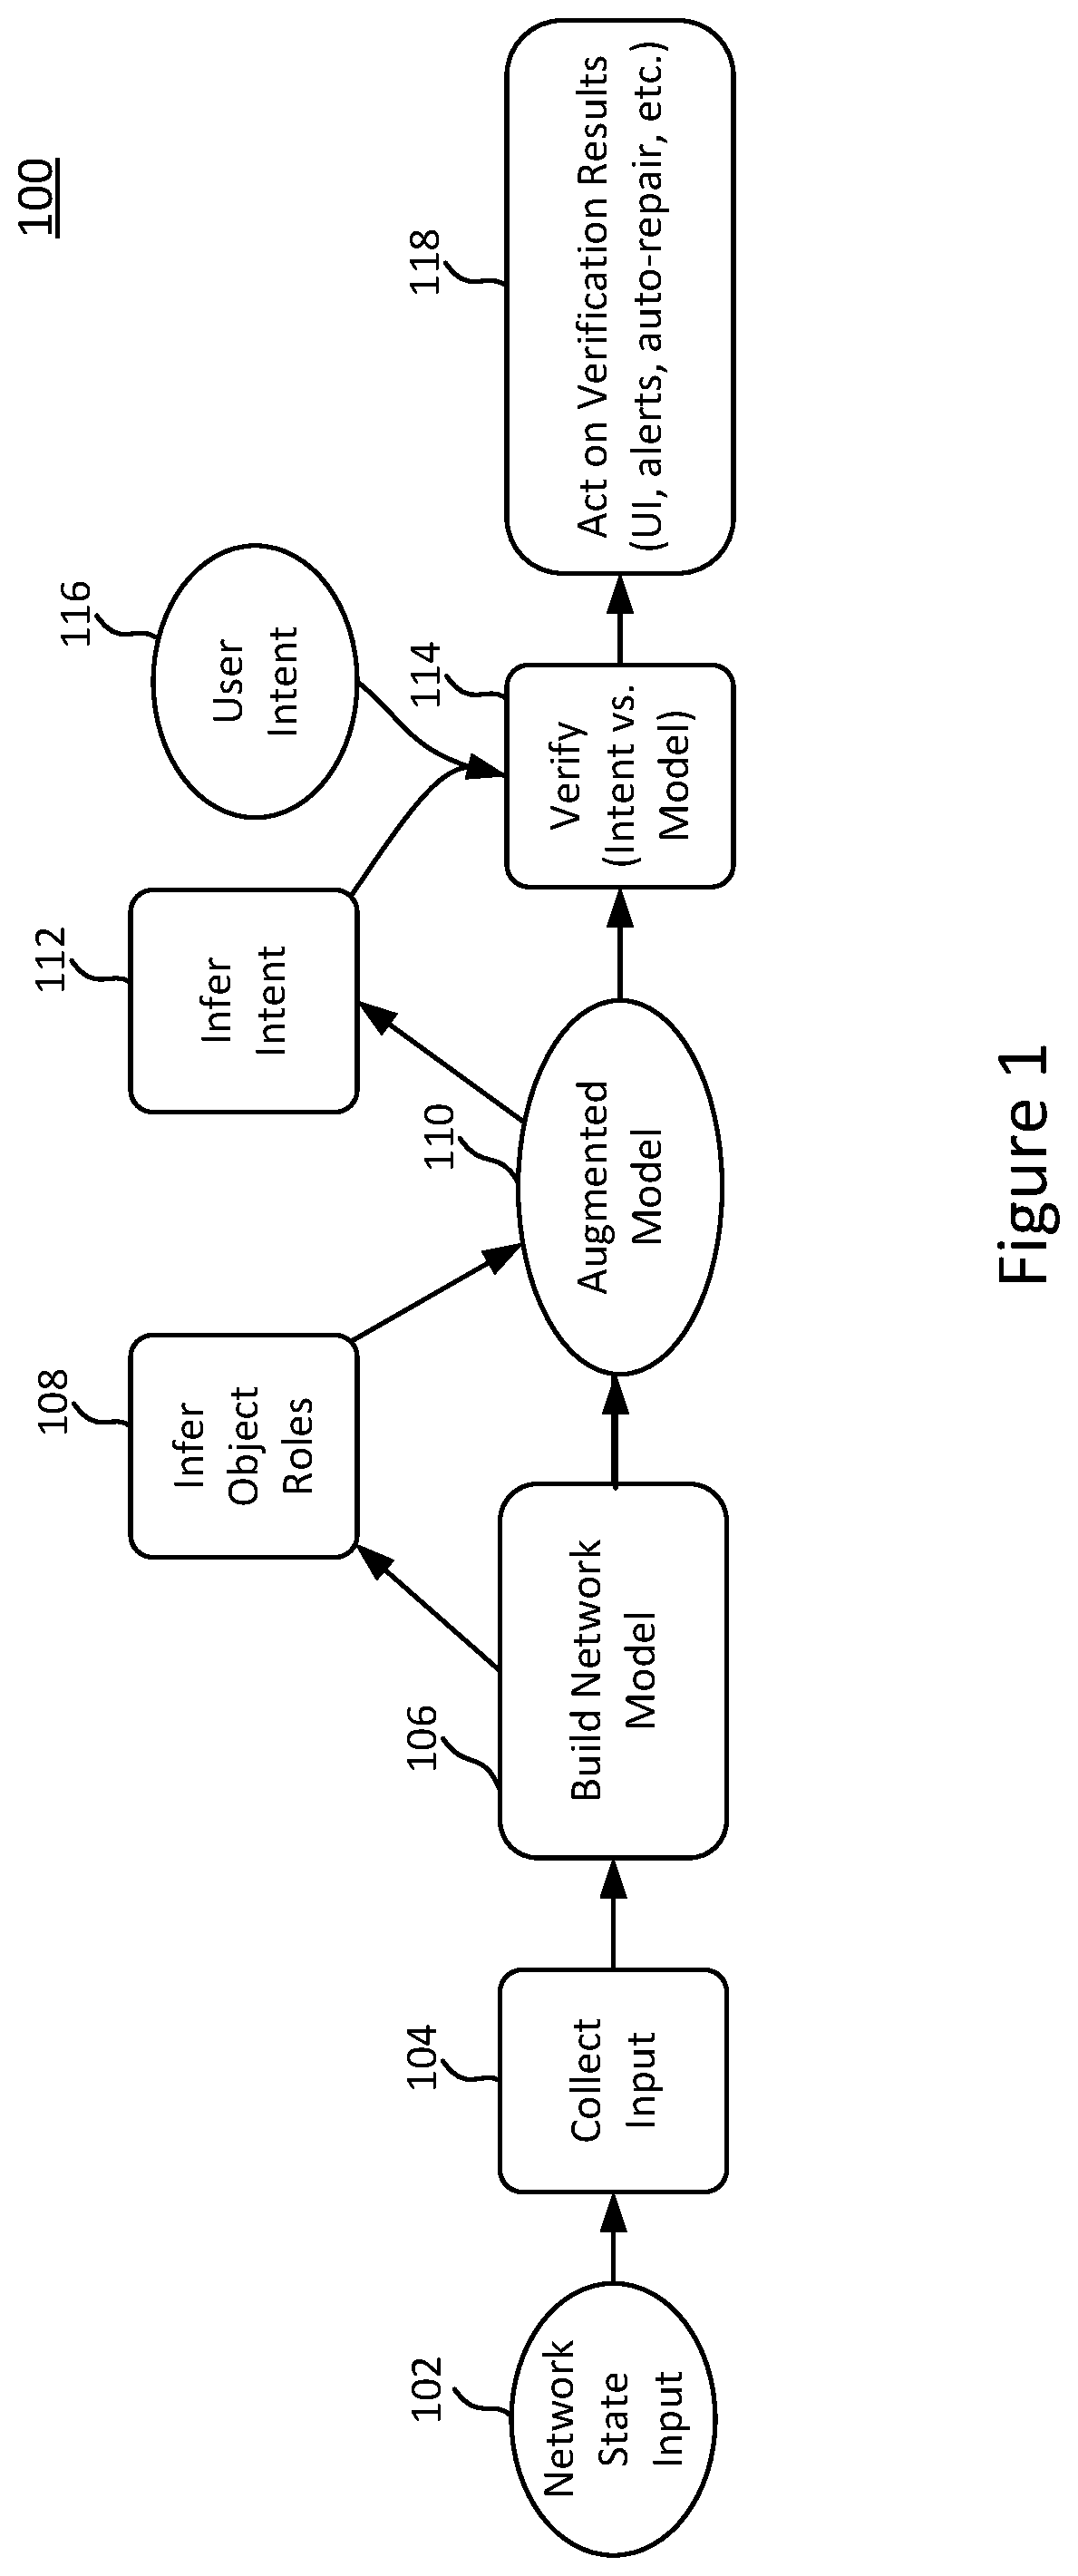 Systems for and methods of network management and verification using intent inference